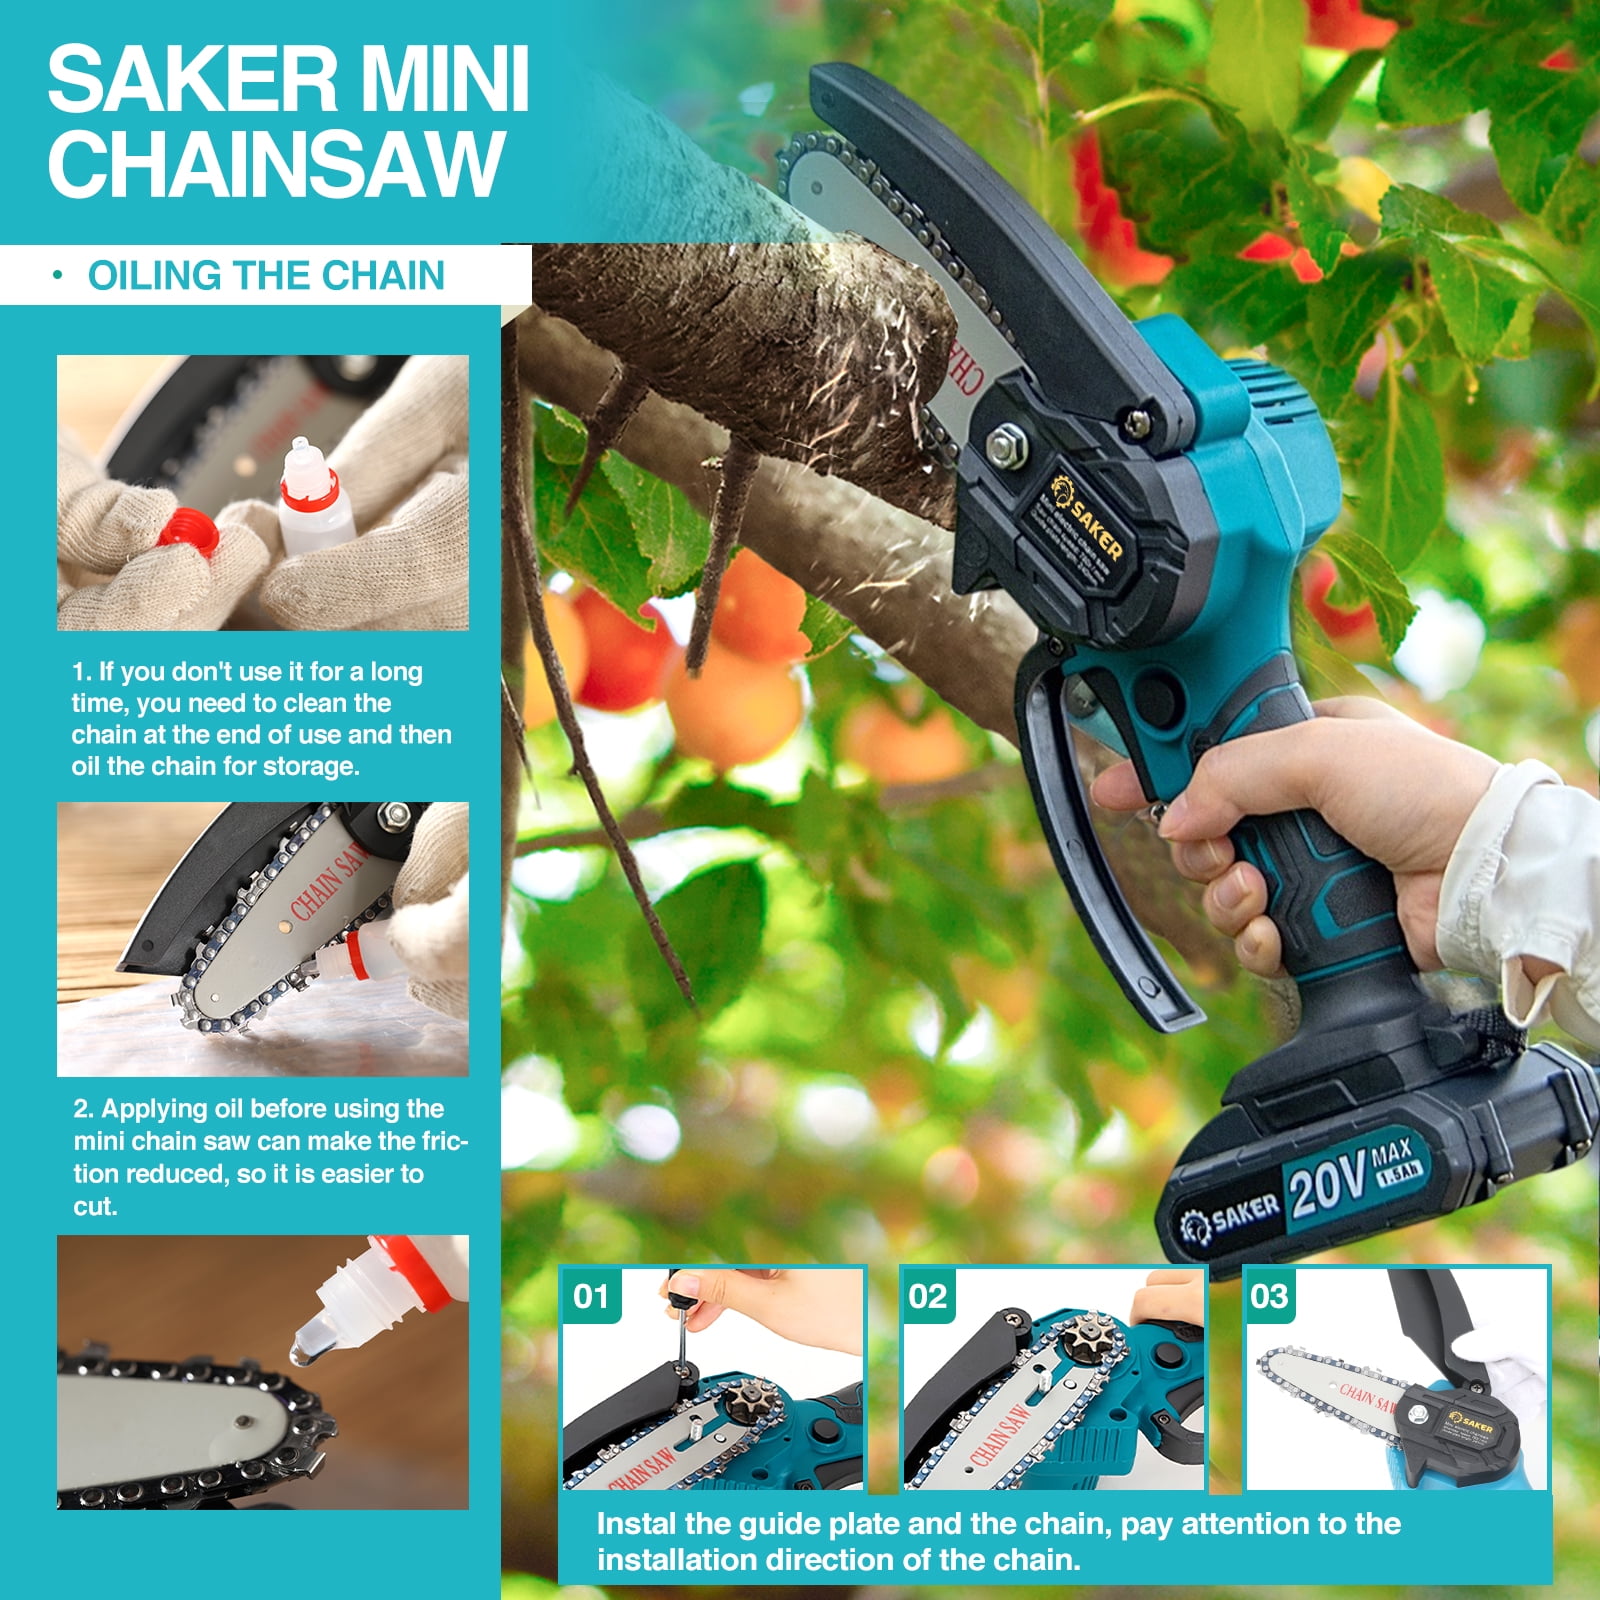 Why You Need to Try the Saker Mini Chainsaw, by Seema J.